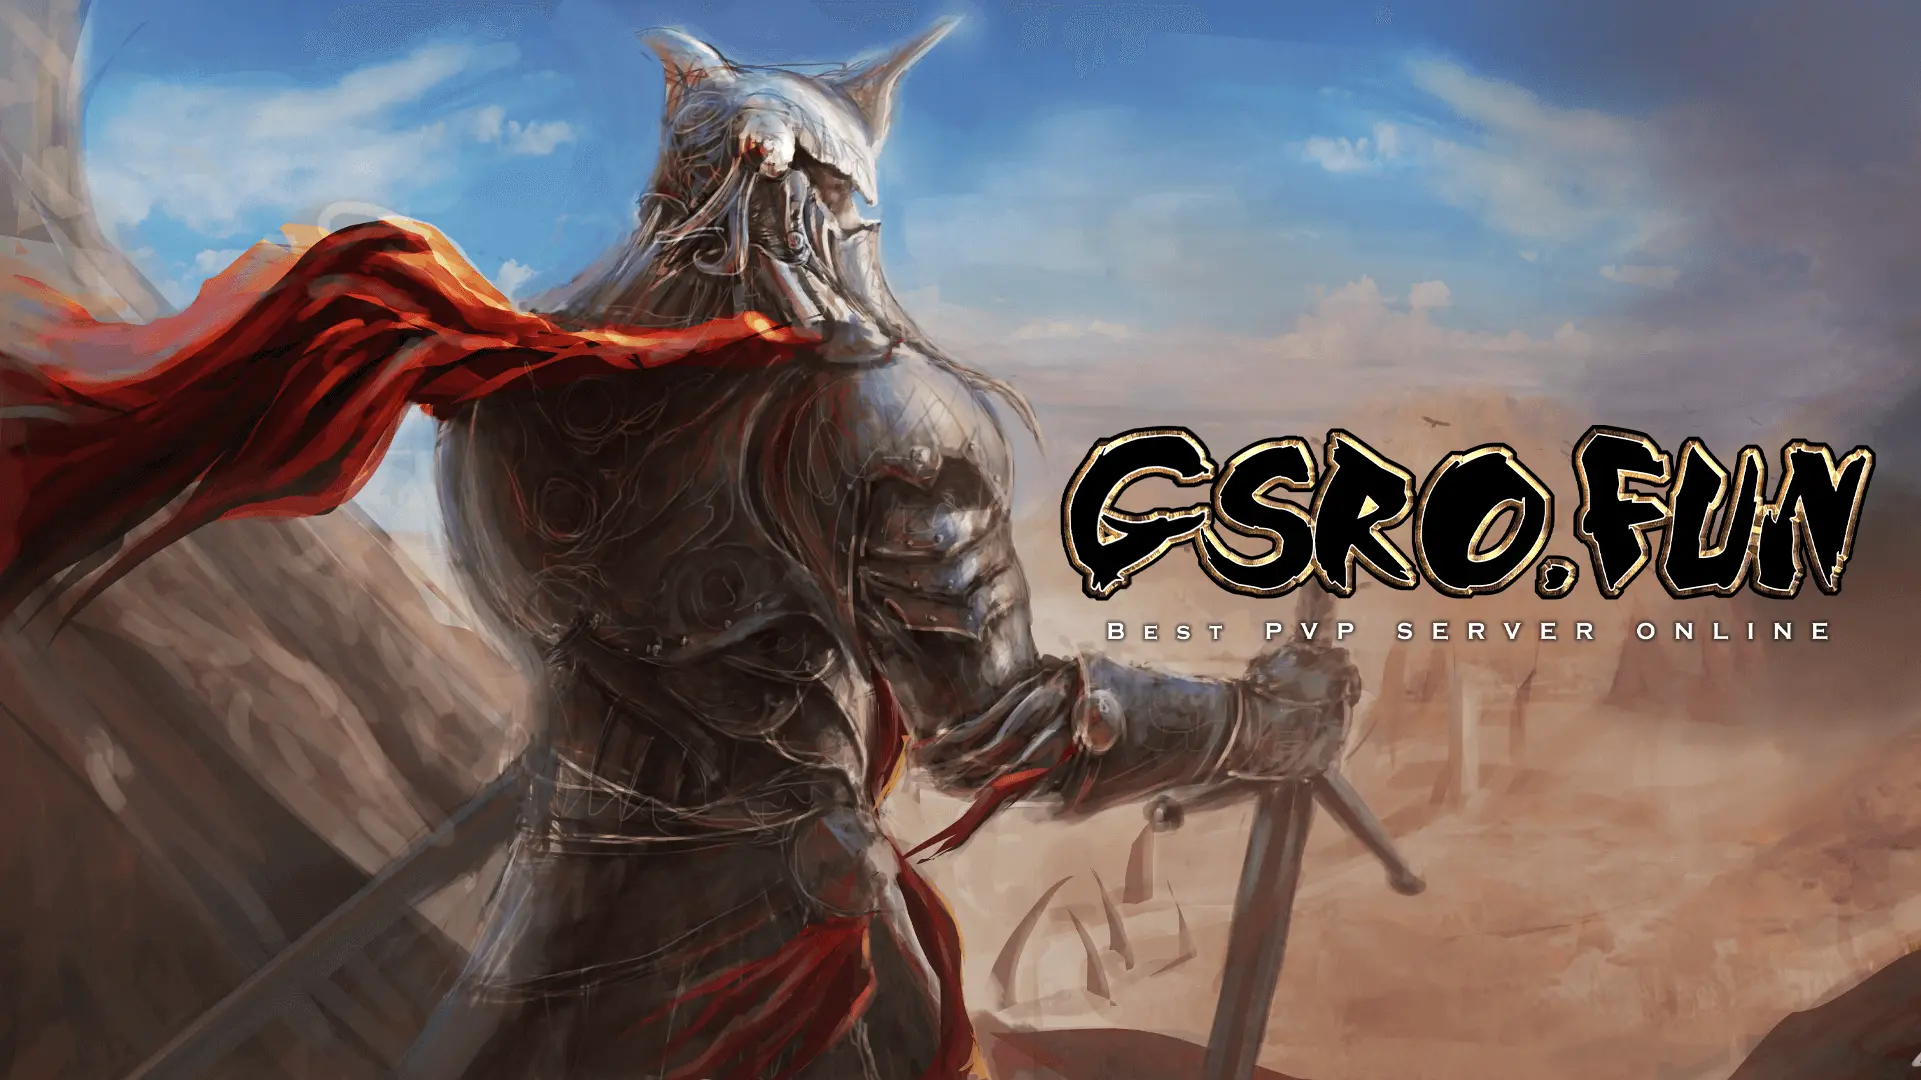 GSRO is The Best Silkroad server ever 2021 - 2022 try it your self.